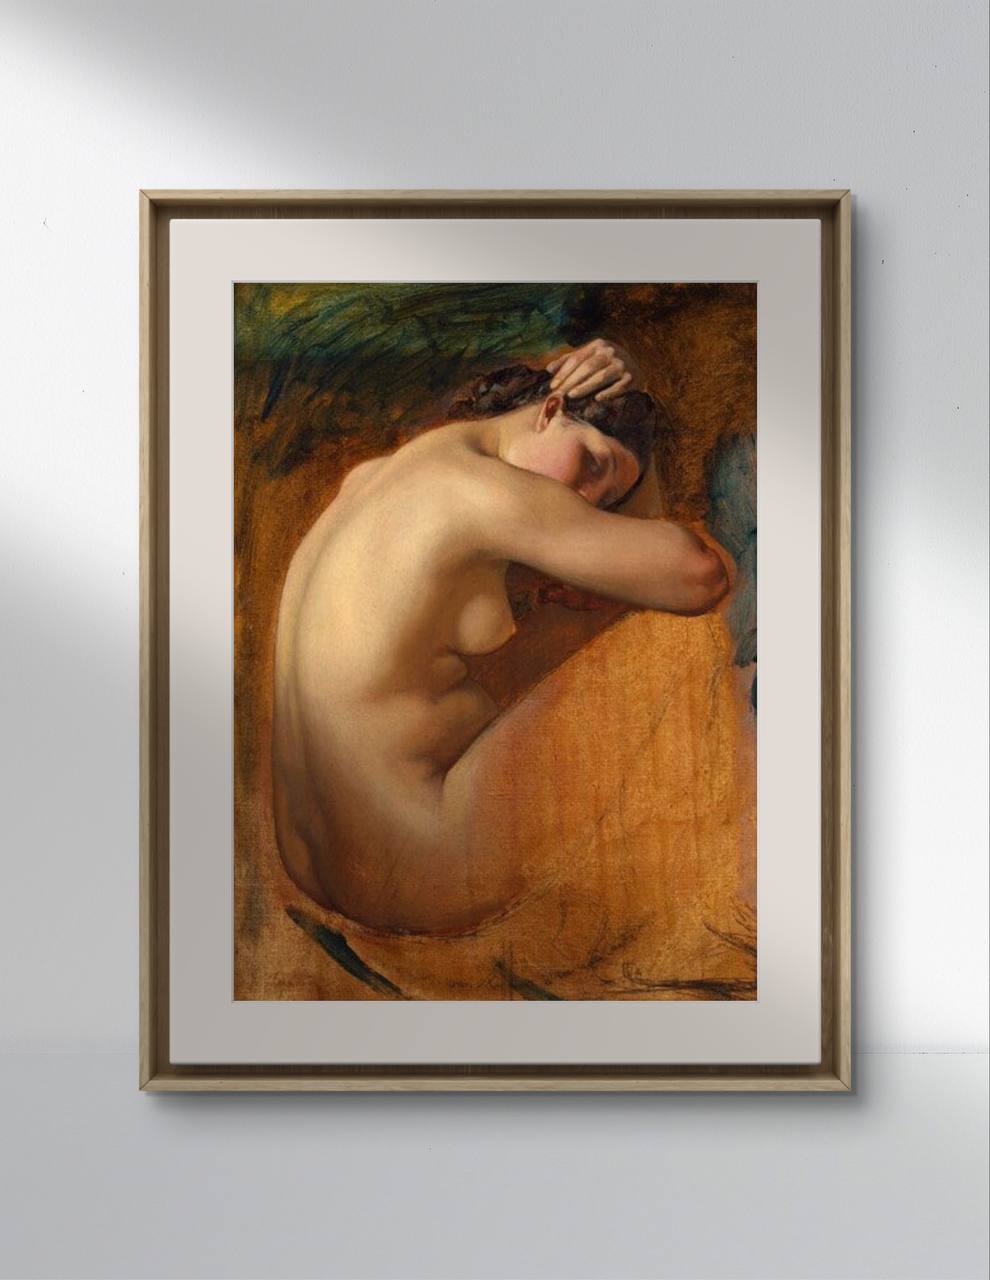 A framed poster of "Study of a Female Nude" by Henri Lehmann, elegantly displayed in a minimalist interior. The painting features a nude woman in a pensive pose with a rich, warm color palette. This art reproduction adds a touch of sophistication and classical beauty to your home decor. Keywords: Wall Art, home decor, painting, art reproduction, famous artist, Poster, print, Henri Lehmann, Study of a Female Nude